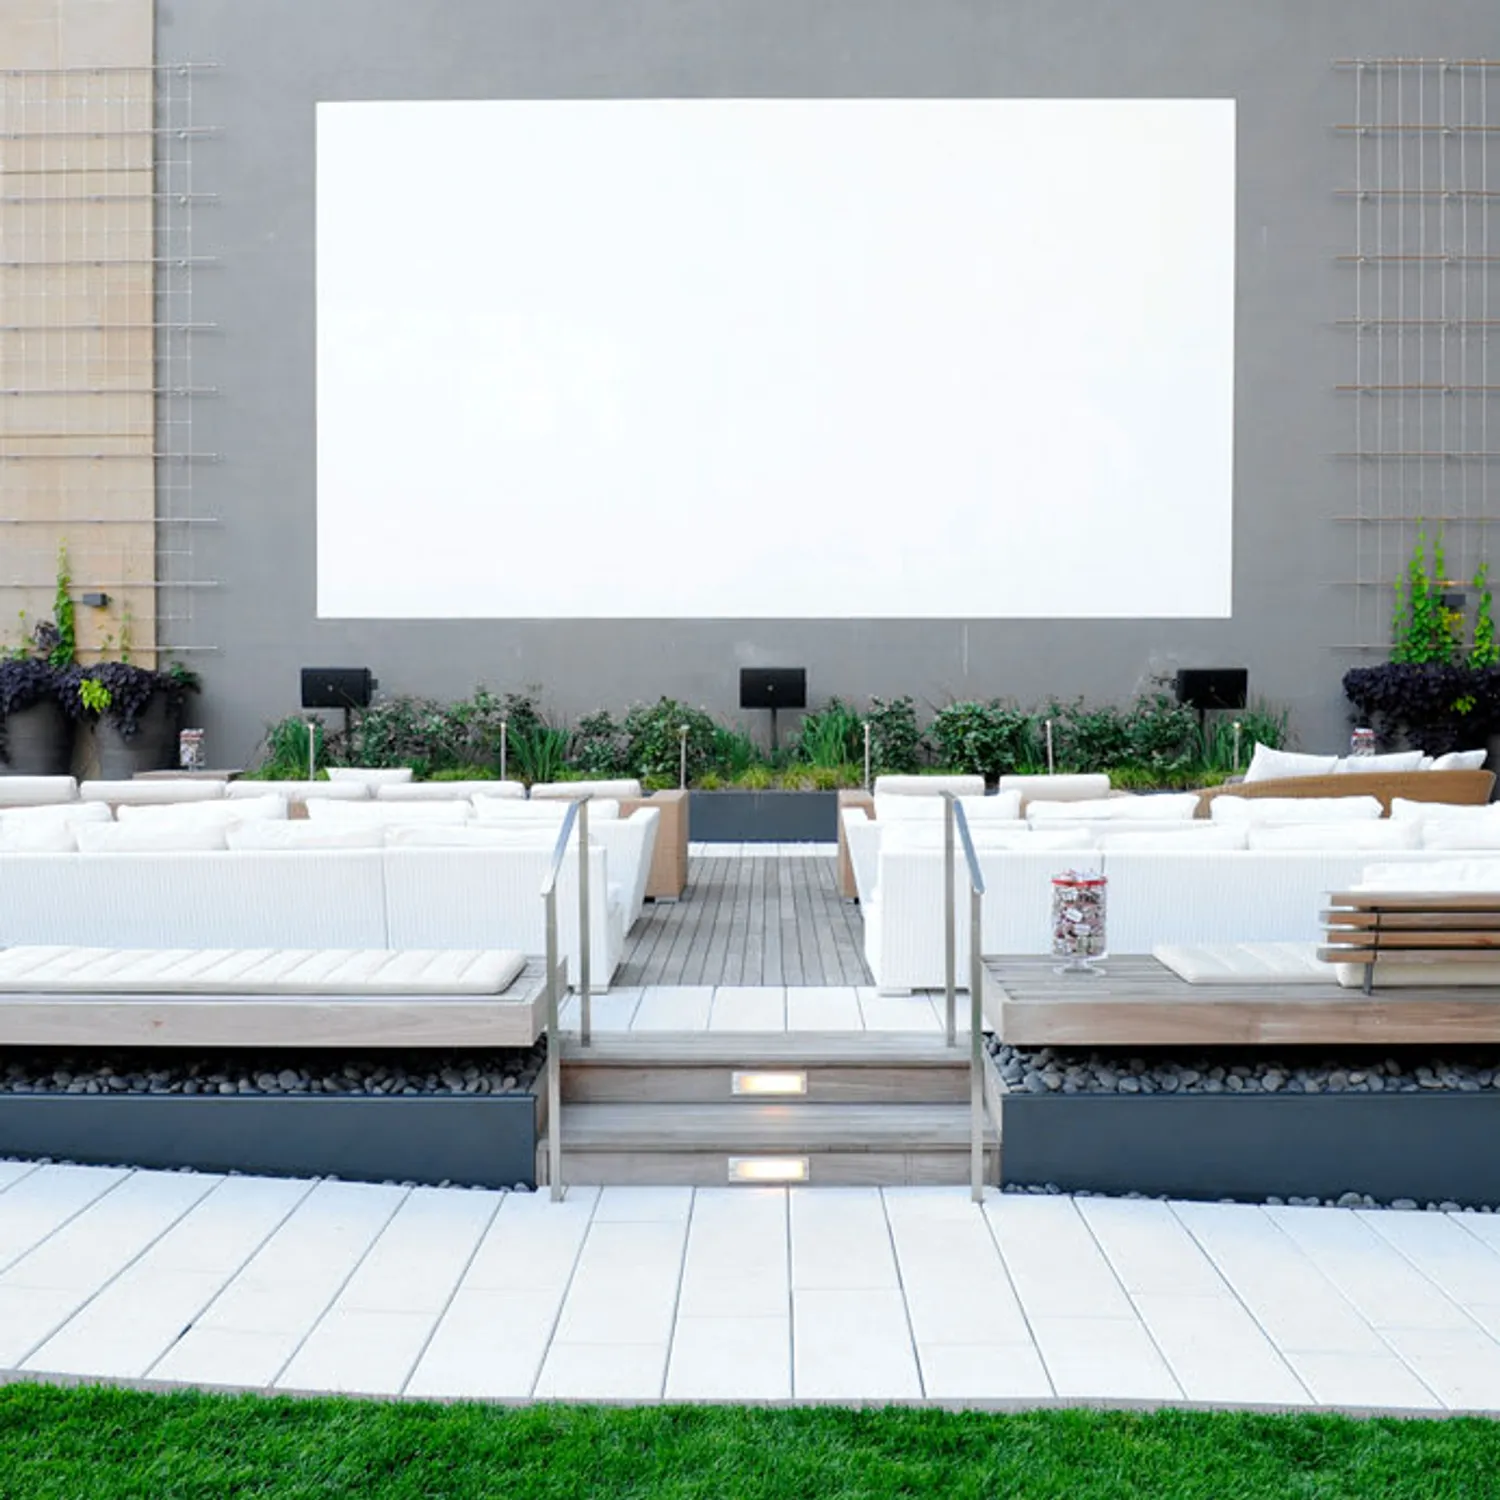 Sun-drenched south law with outdoor cinema.